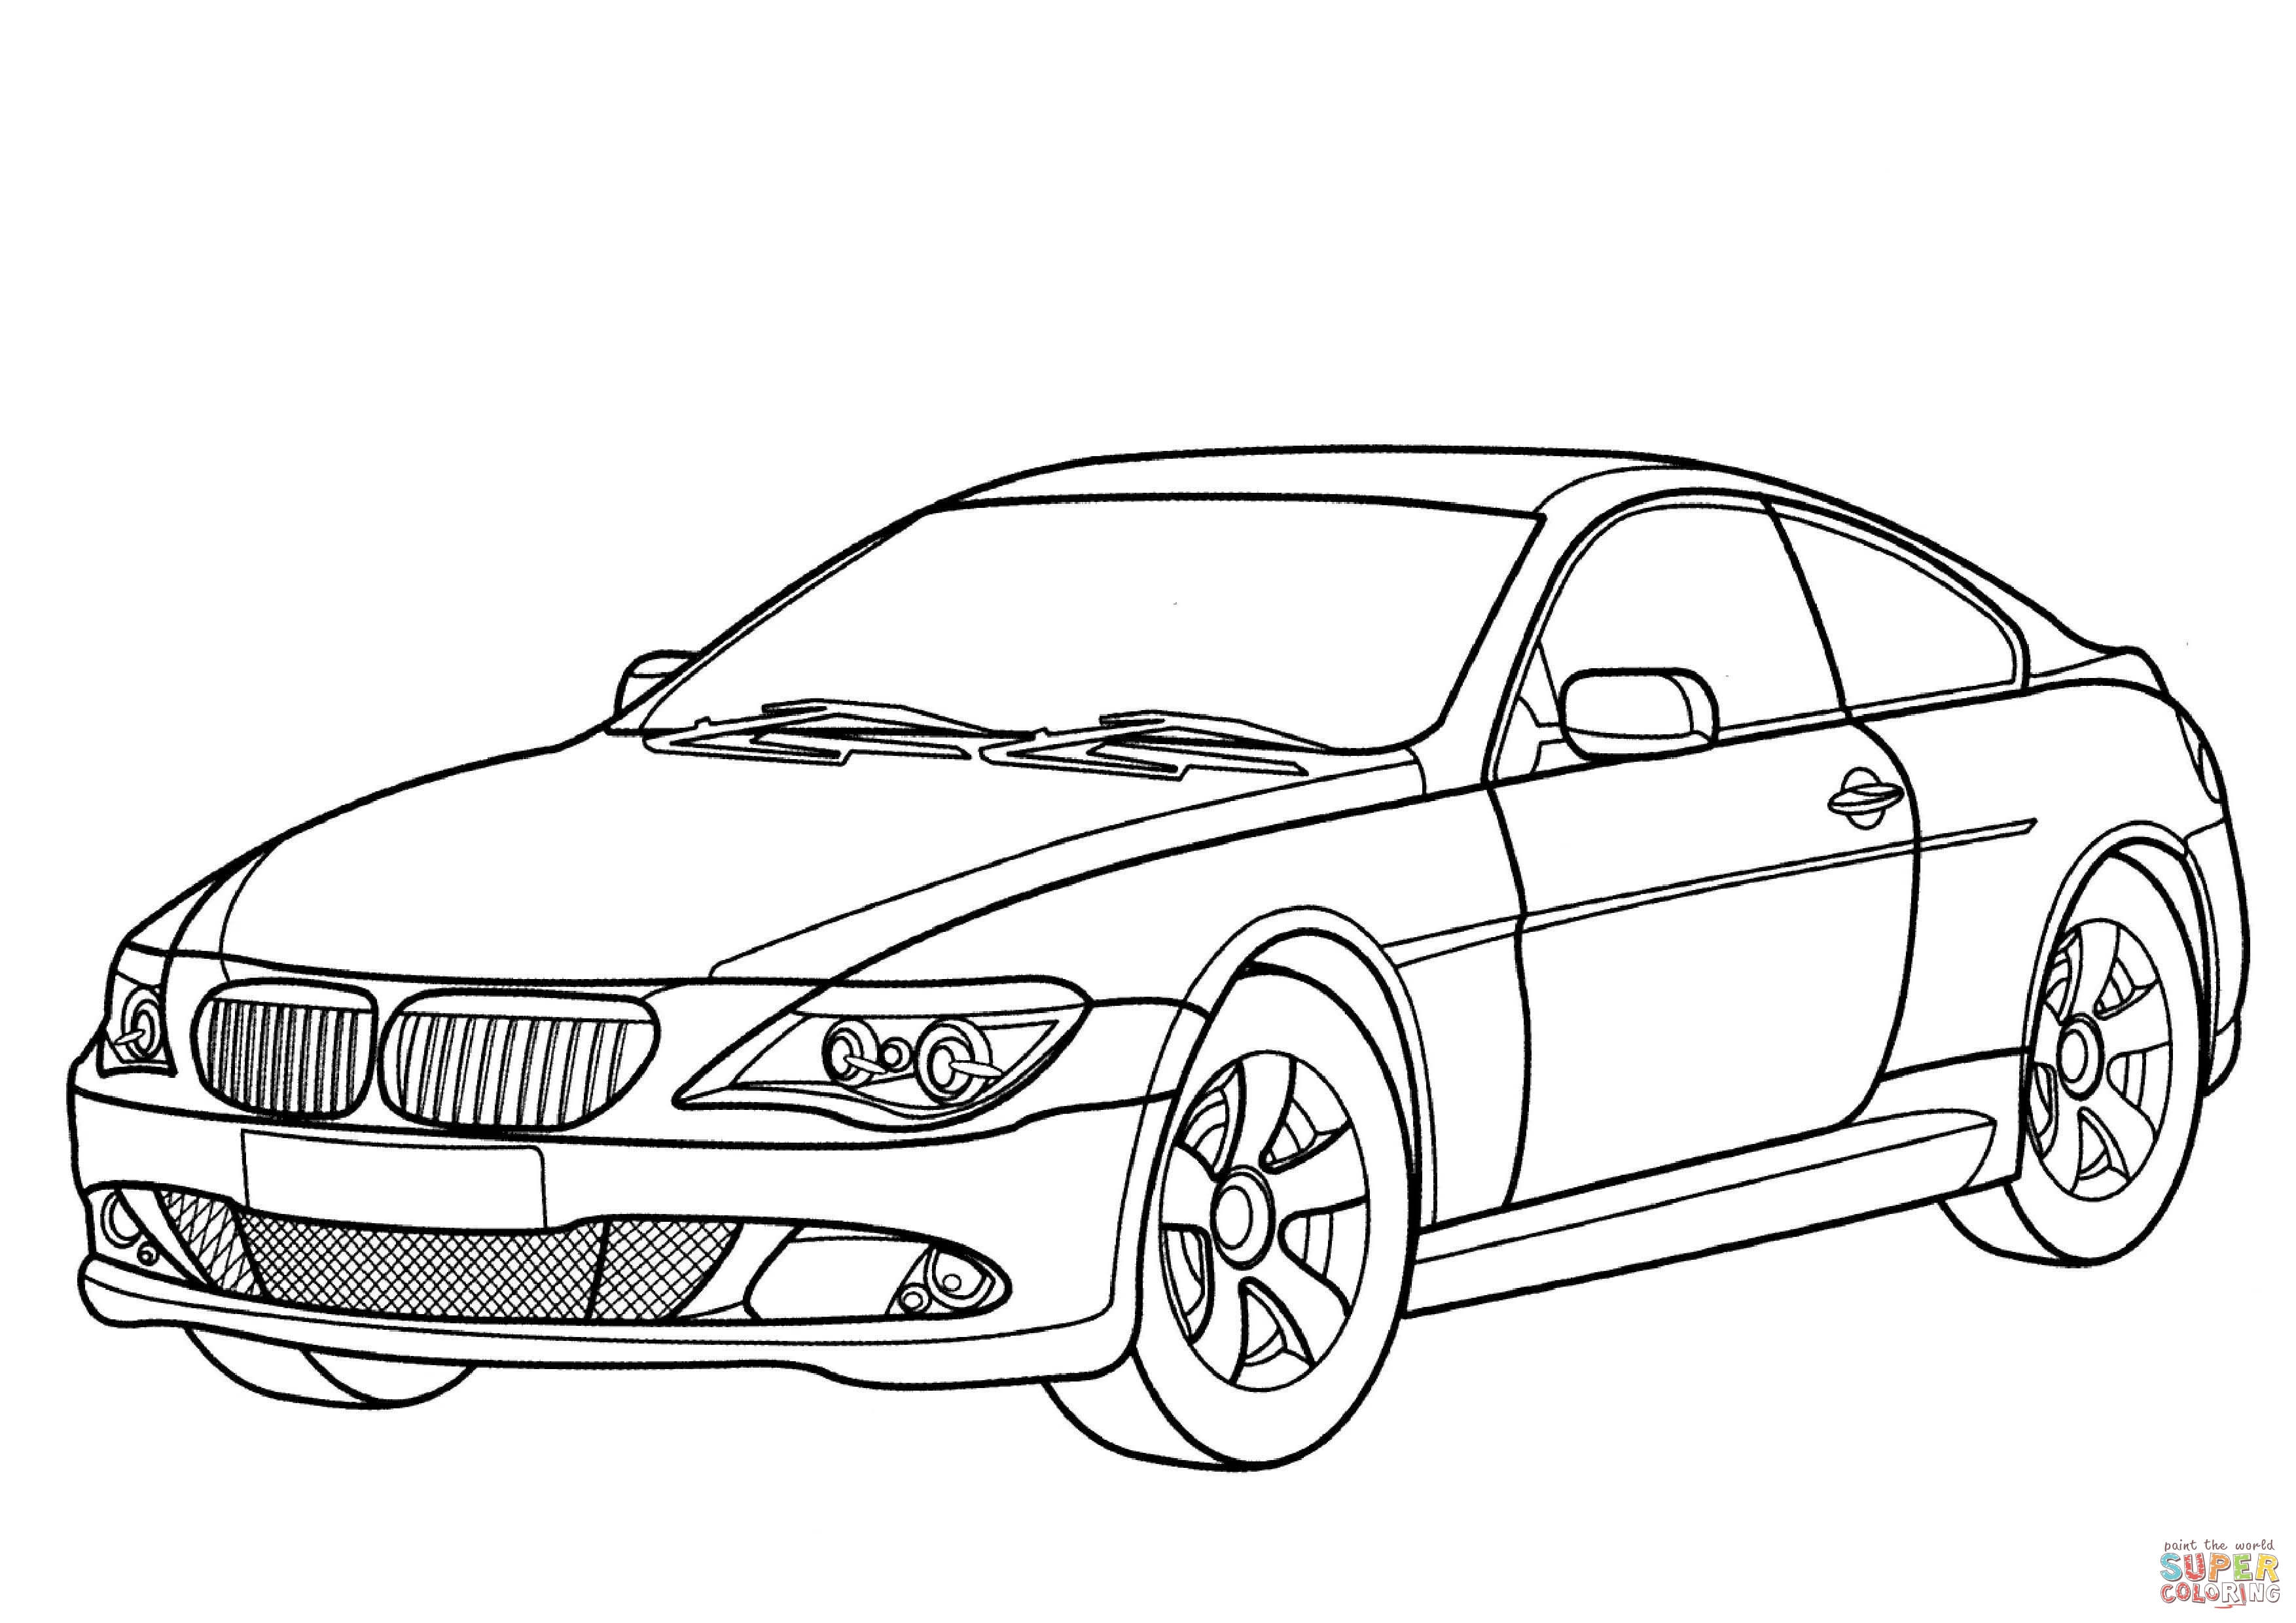 Free Bmw Car Coloring Pages, Download Free Bmw Car Coloring Pages png